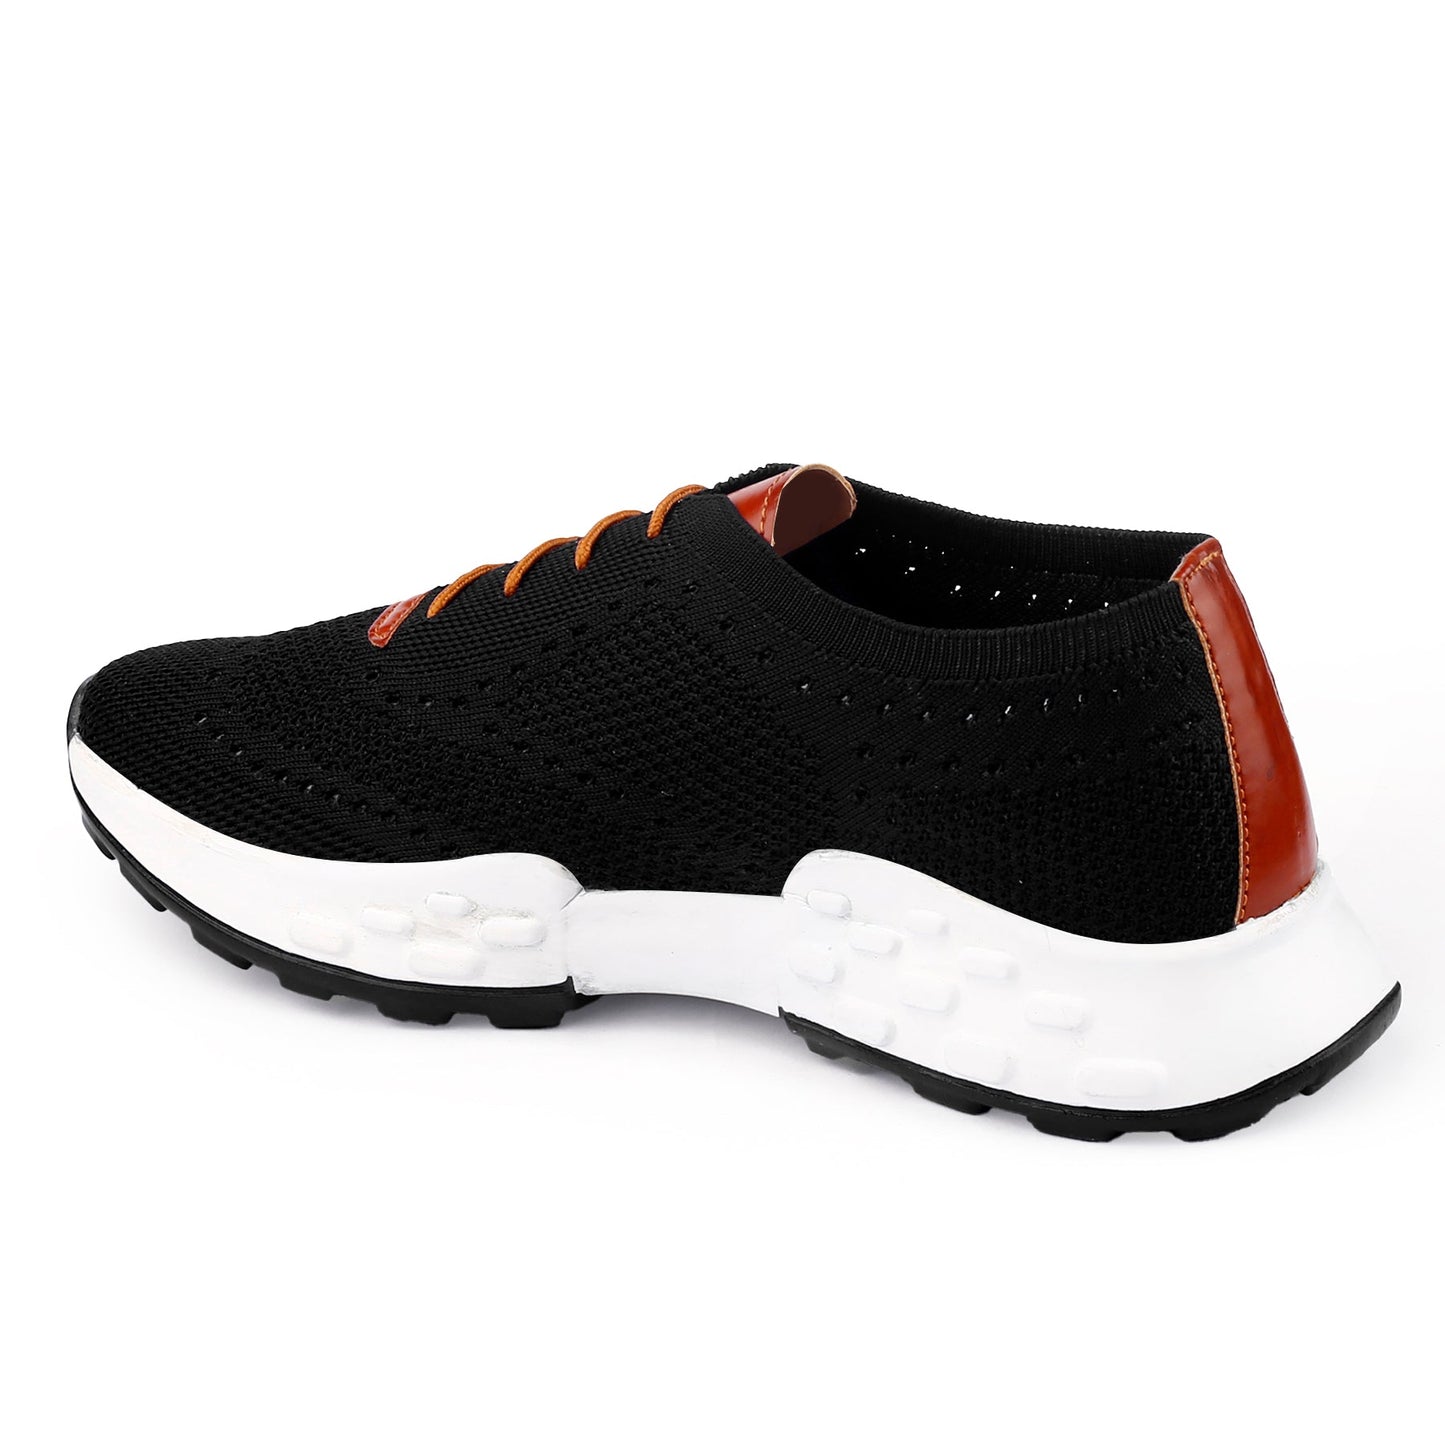 Men's Stylish Casual Lace-Up Sports Running Shoes